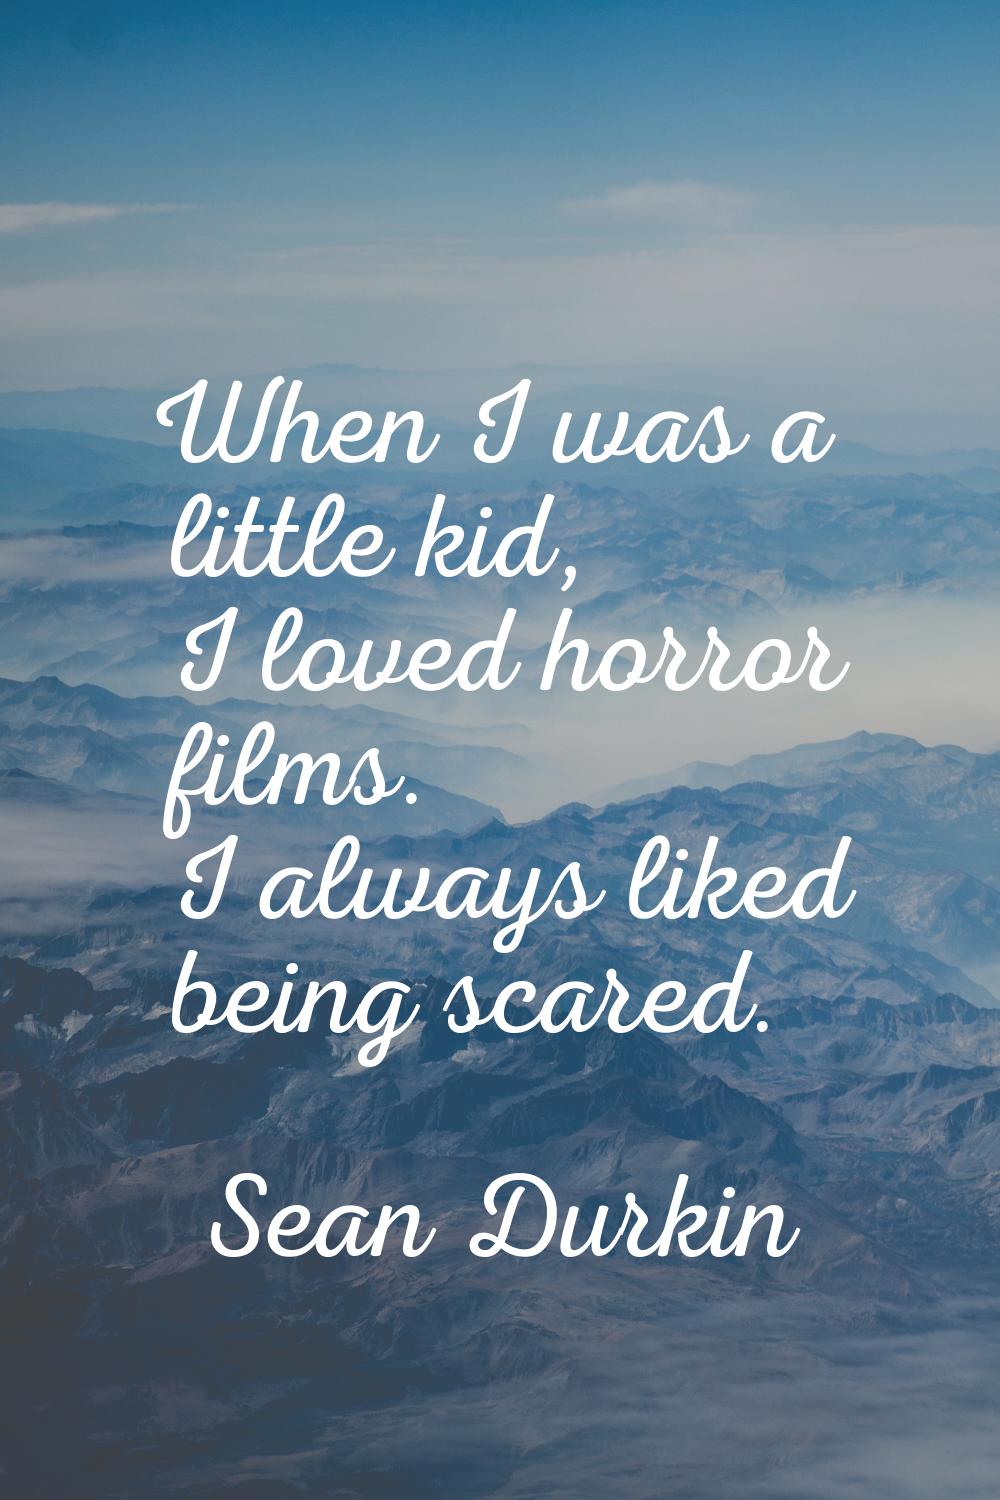 When I was a little kid, I loved horror films. I always liked being scared.